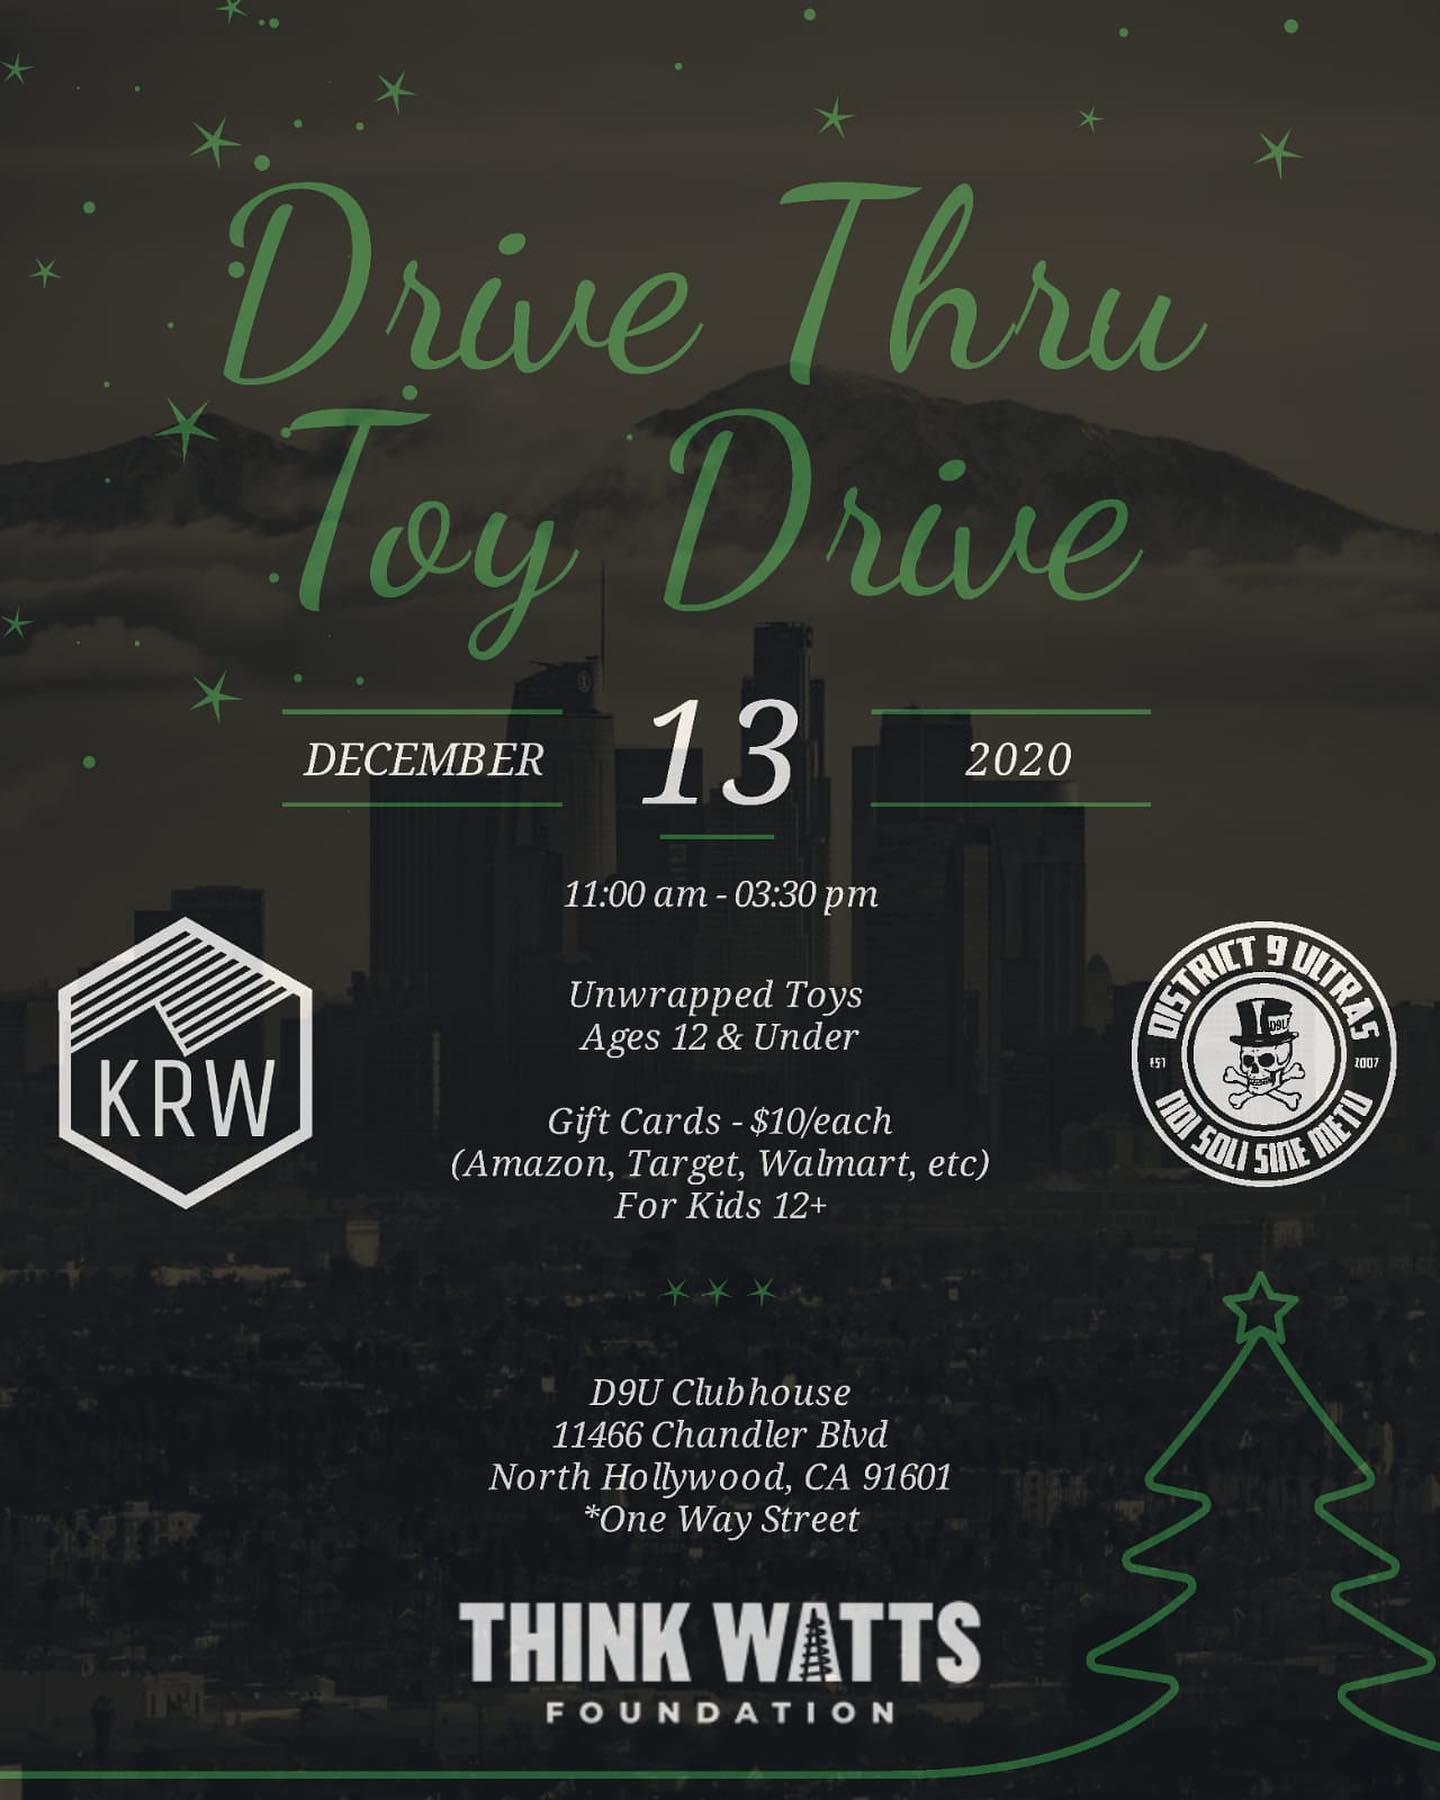 Tis the Season! The @lafckrew (the supporter group i rep) and the  @district9ultras are having a Drive Thru TOY Drive! Along with @thinkwatts foundation, Please Bring an unwrapped toy to make someone else’s Christmas extra special! Tomorrow in the IE and Sunday in No Ho! Hope we all can join in on the Christmas Cheer ⁣
.⁣
.⁣
.⁣
.⁣
.⁣
#lafçok #lafcdconfinéealamaison